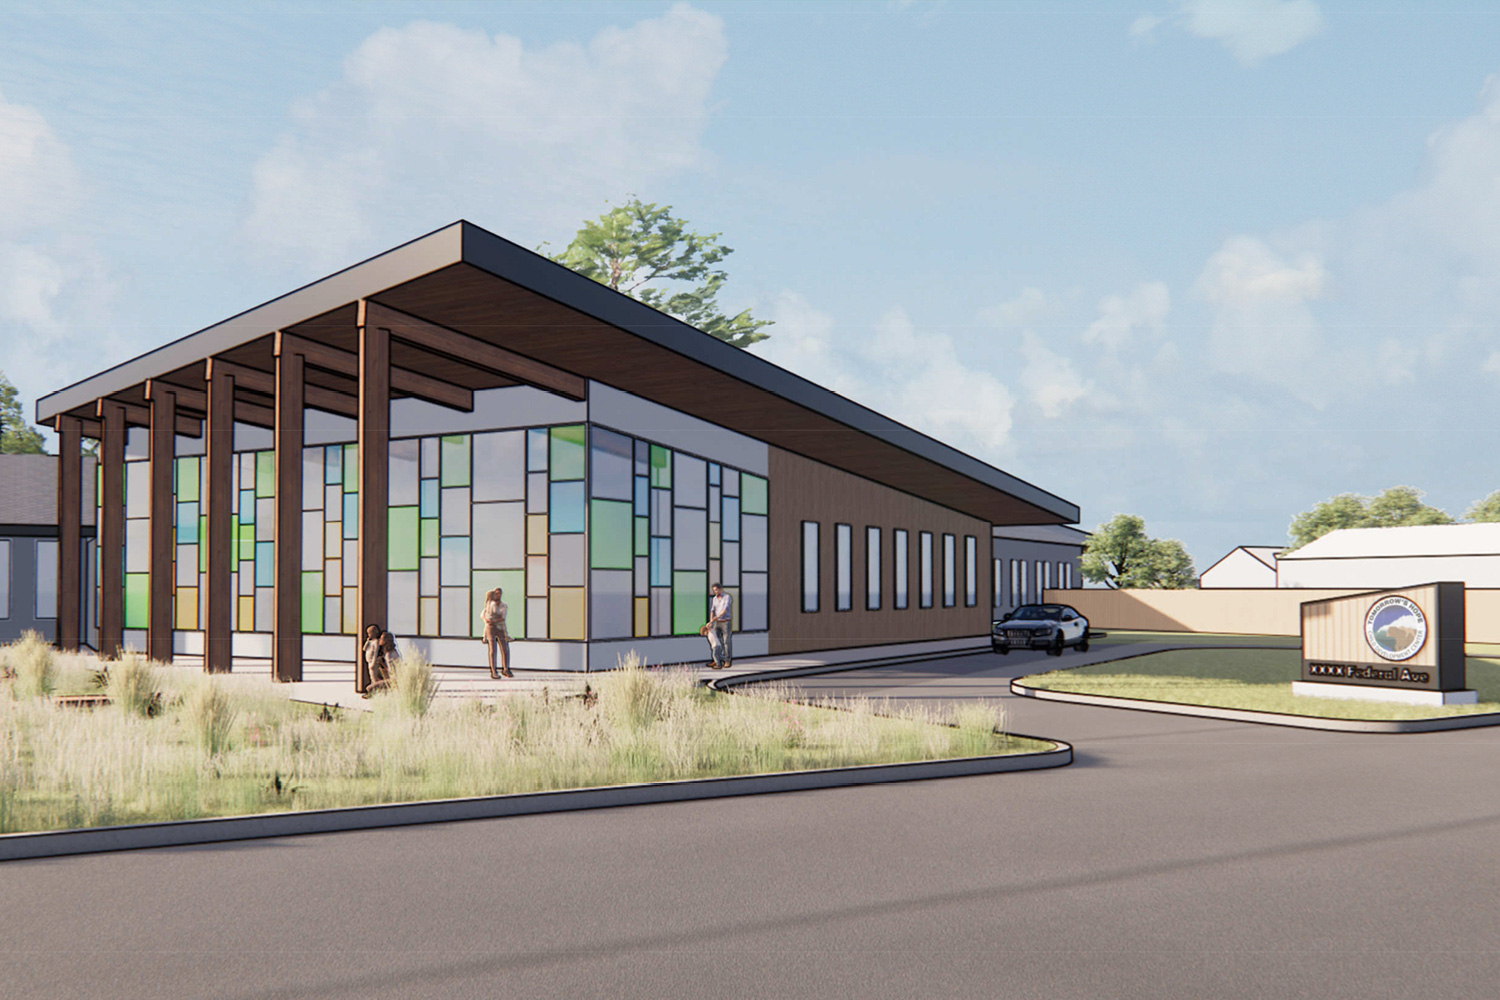 Rendering of the front of a large new daycare facility, with a sloped roof and driveway.